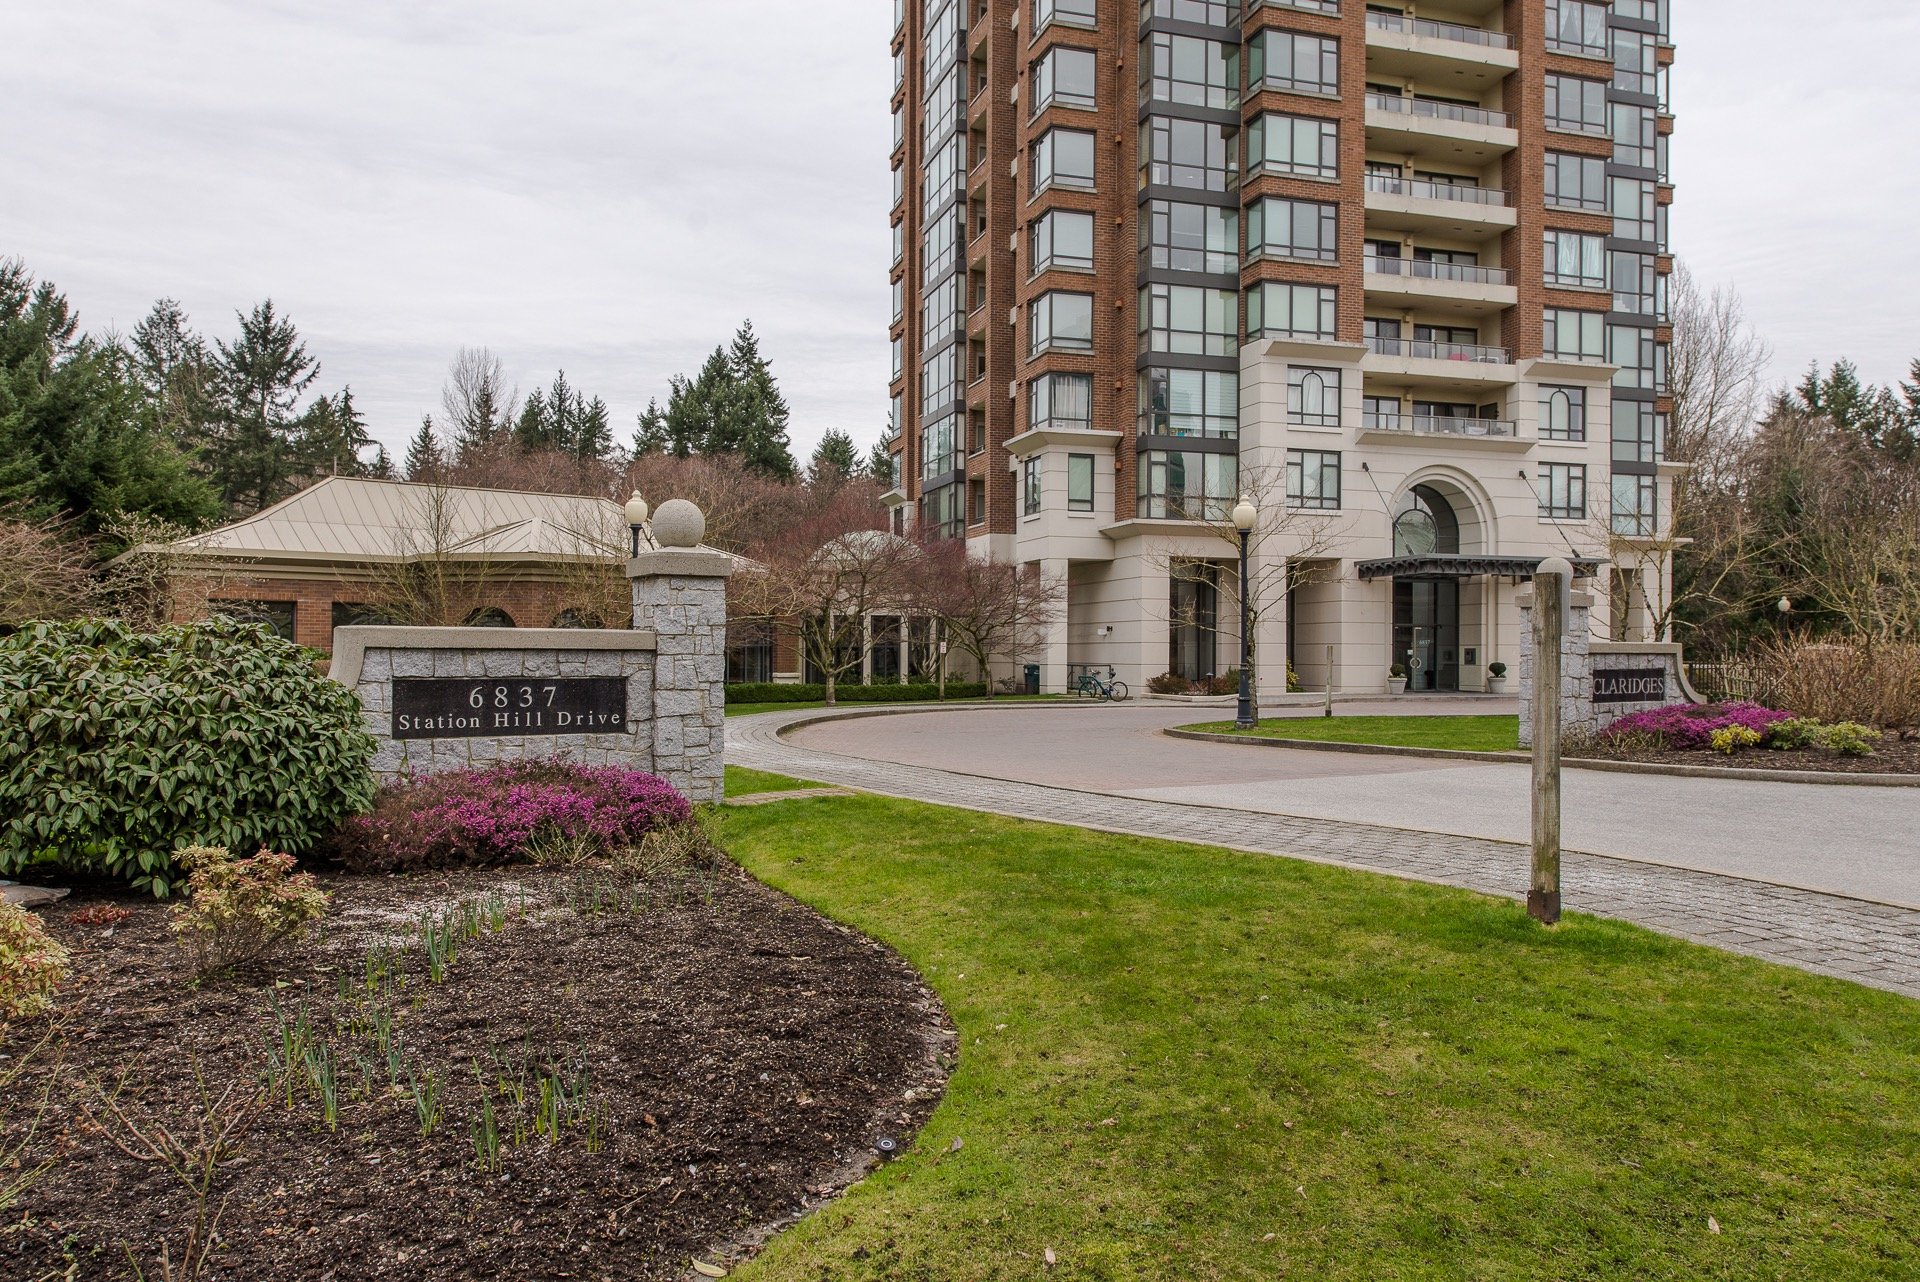 801 - 6837 Station Hill Drive, Burnaby